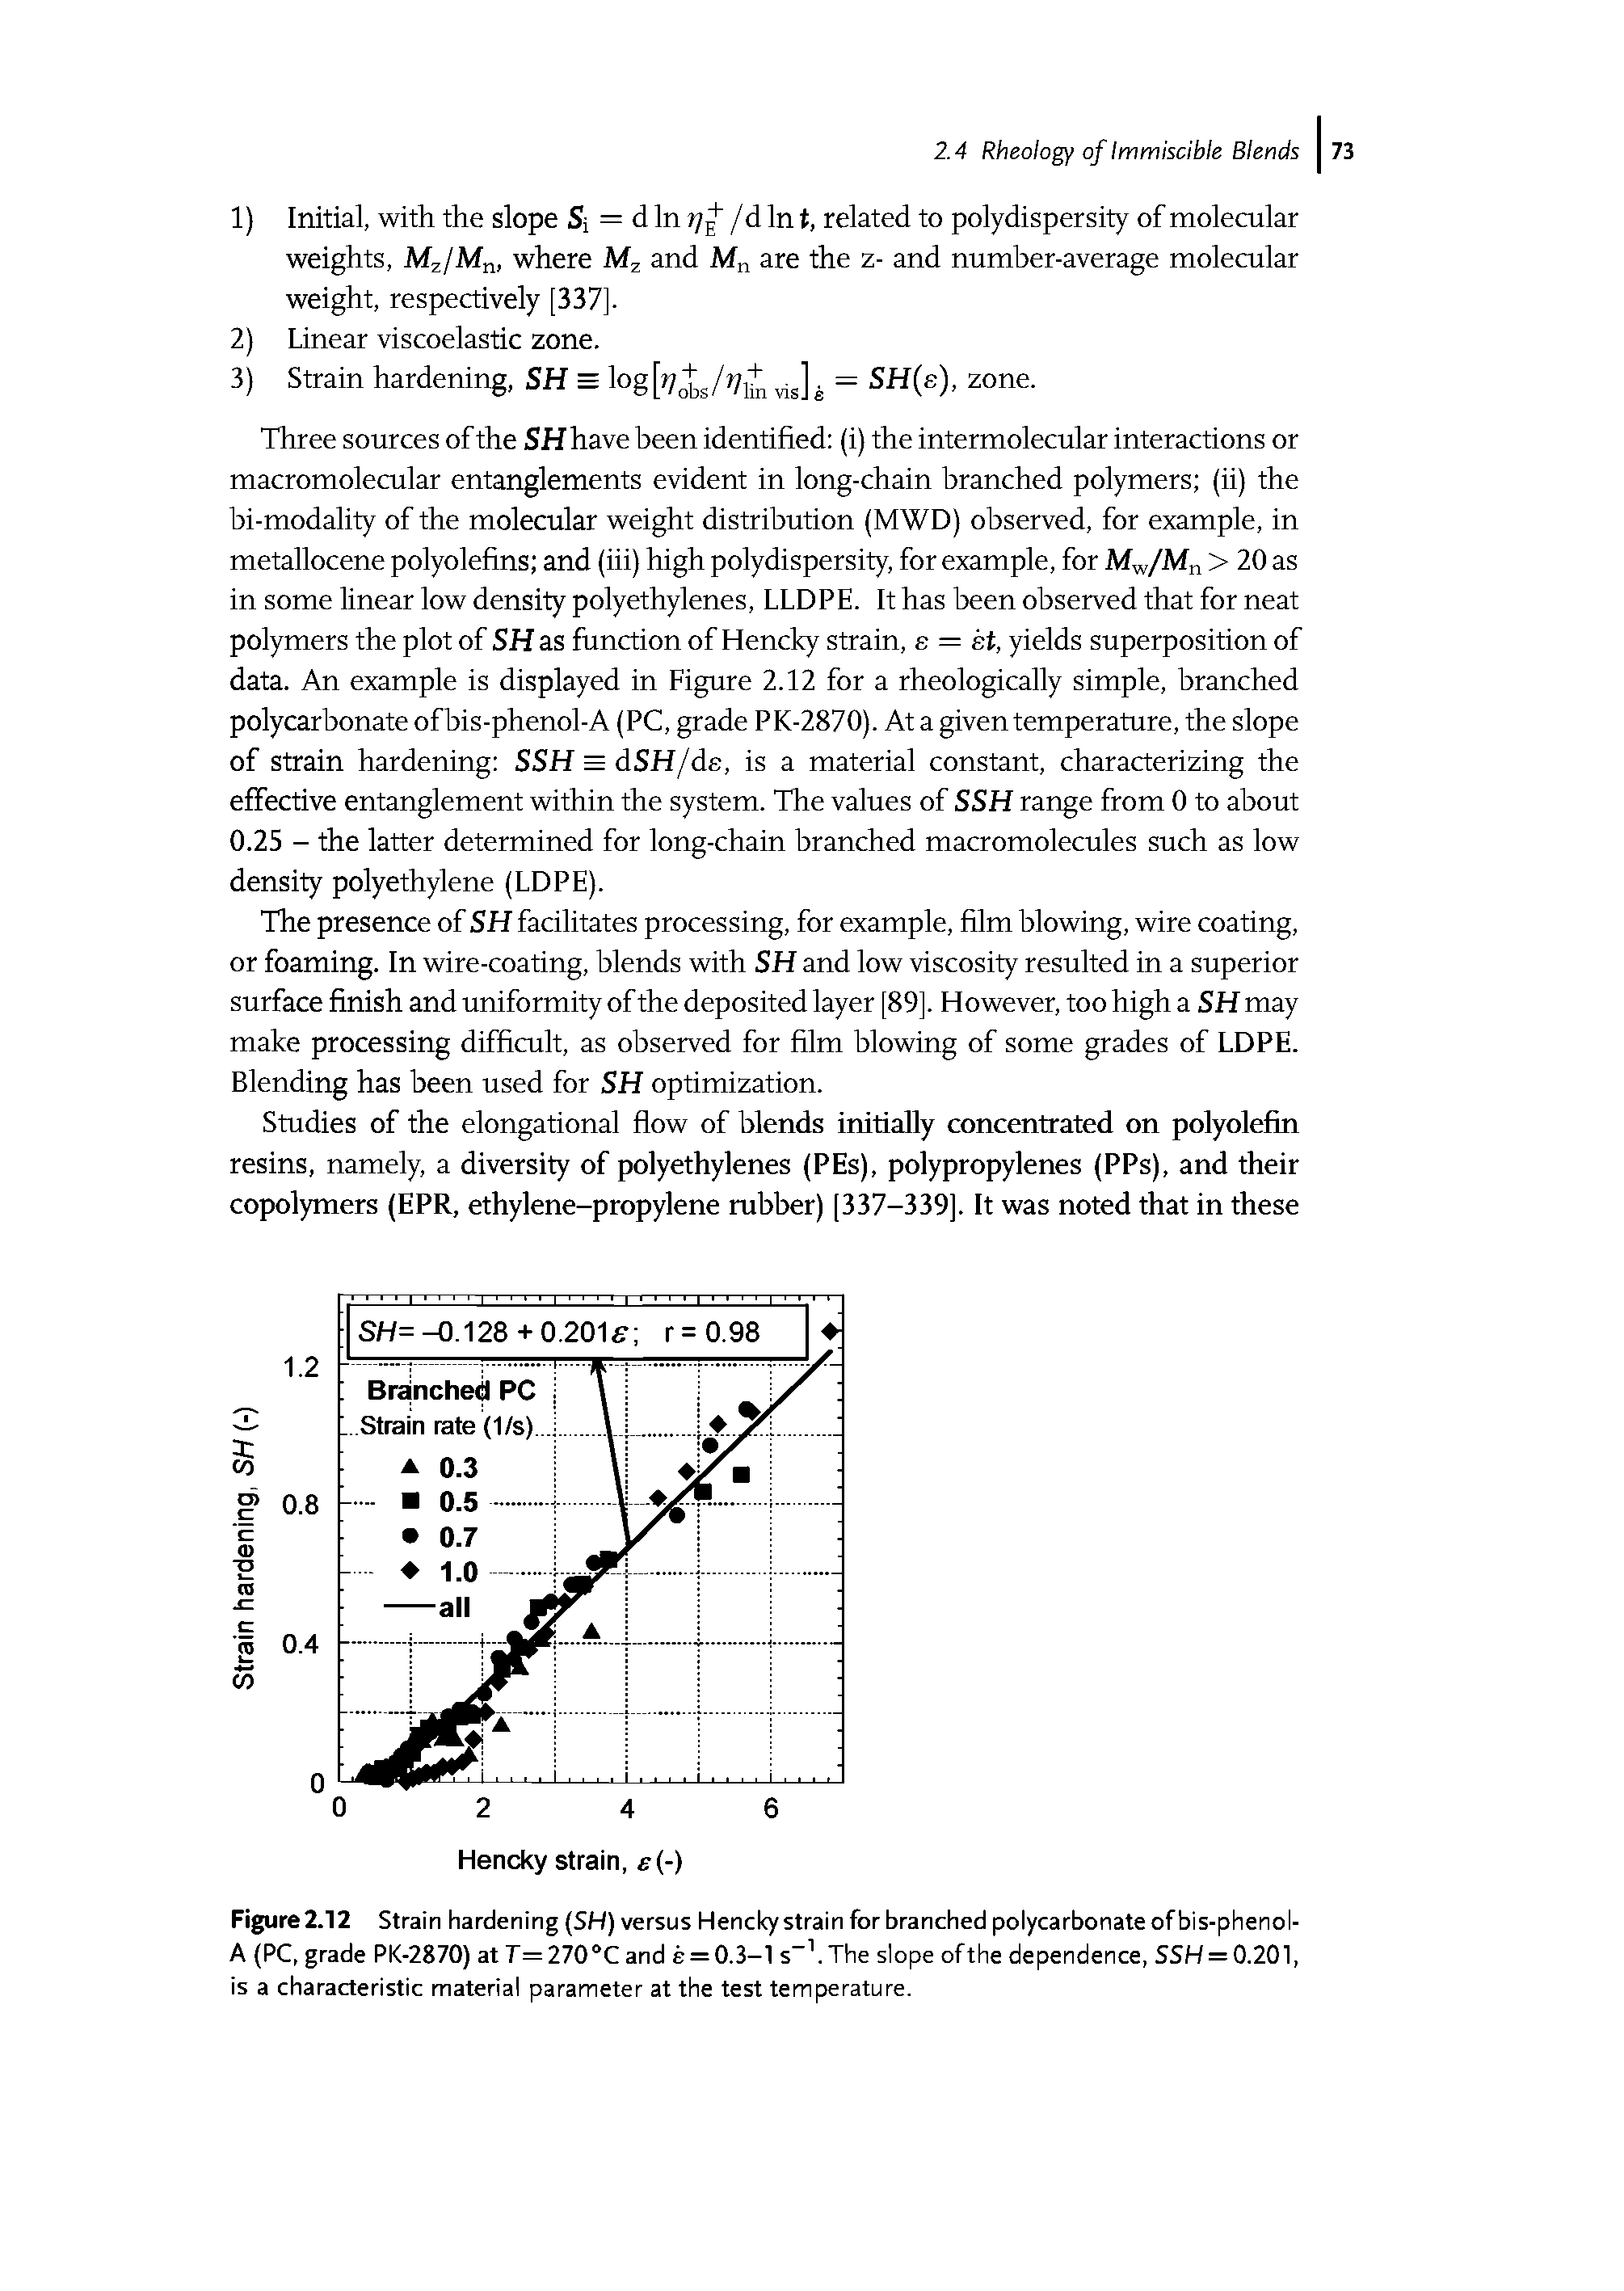 Figure 2.12 Strain hardening (SH) versus Hencky strain for branched polycarbonate of bis-phenol-A (PC, grade PK-2870) at 7=270 °C and s = 0.3-1 s .The slope of the dependence, SSH = 0.201, is a characteristic material parameter at the test temperature.